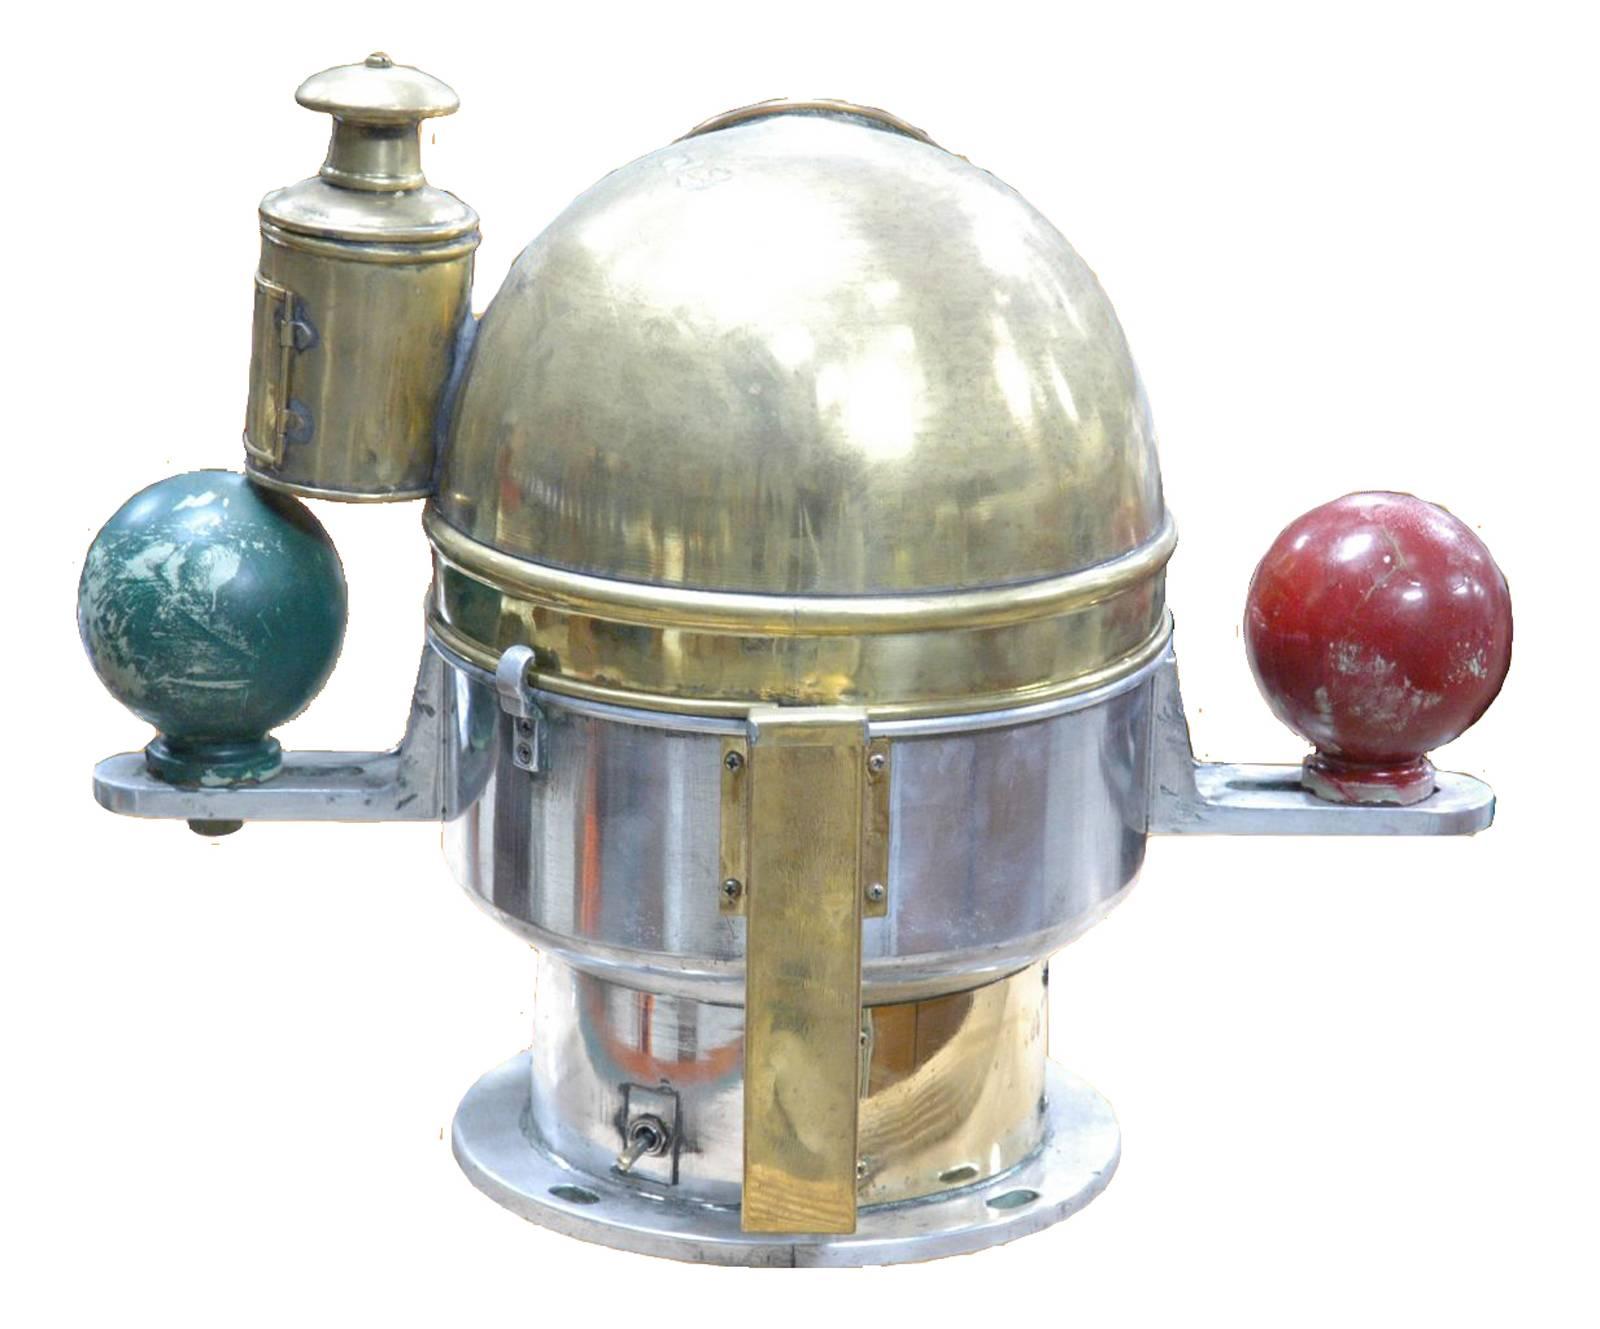 Japanese Compact Binnacle Compass made by Nunotani Seiki Seisakusho Co. Ltd. Complete with its compensating balls, oil lamp. Aluminum and brass H 40 cm / D 28 cm 18 kg.
 